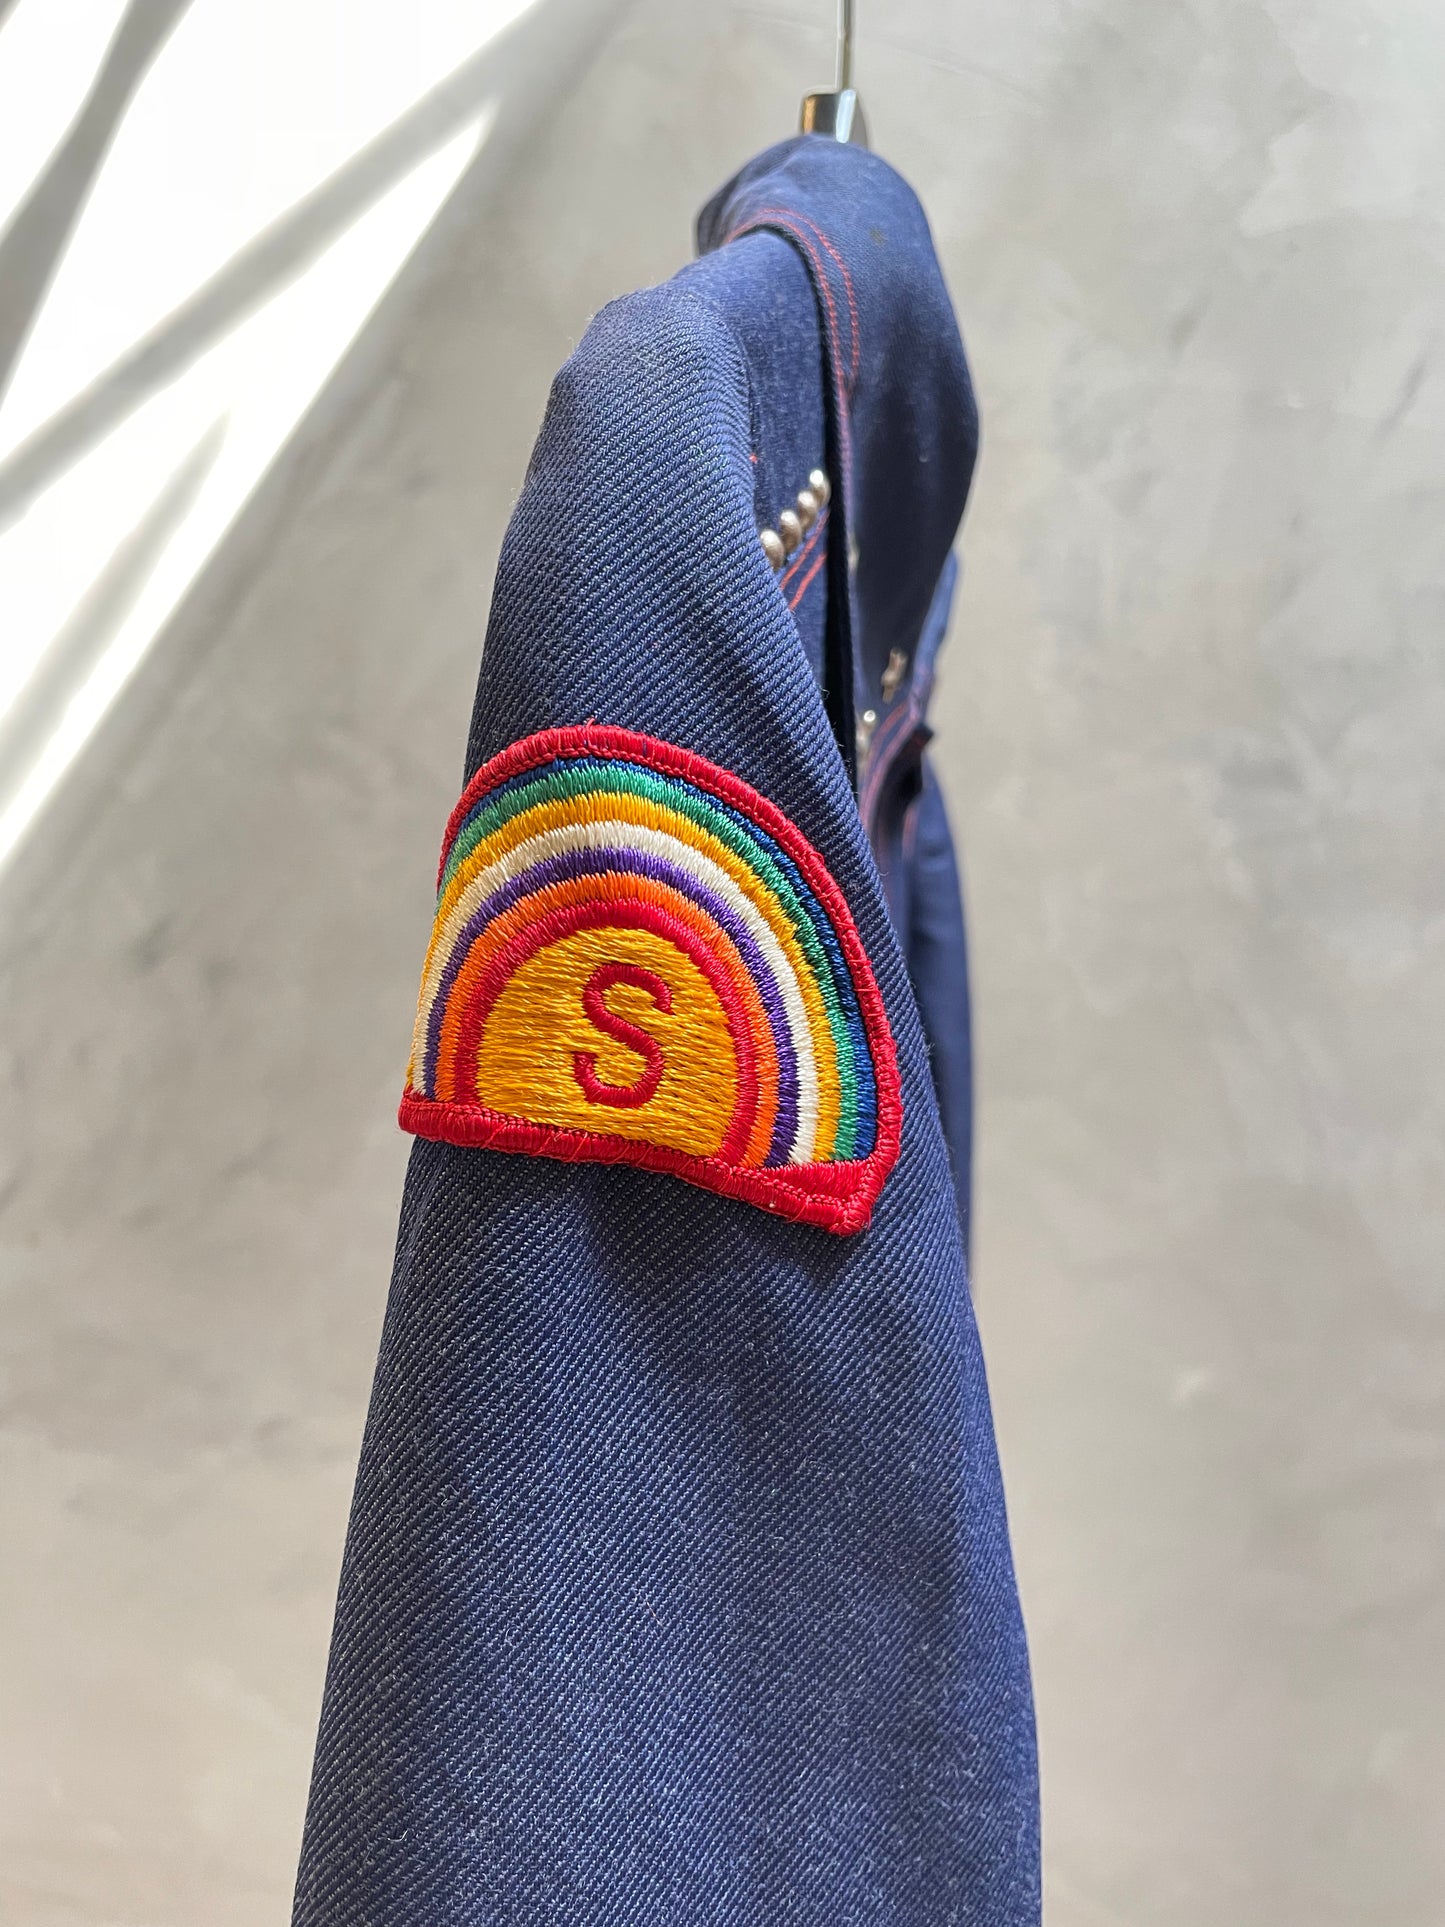 70S denim jackect embroded Decorated with starts and dots